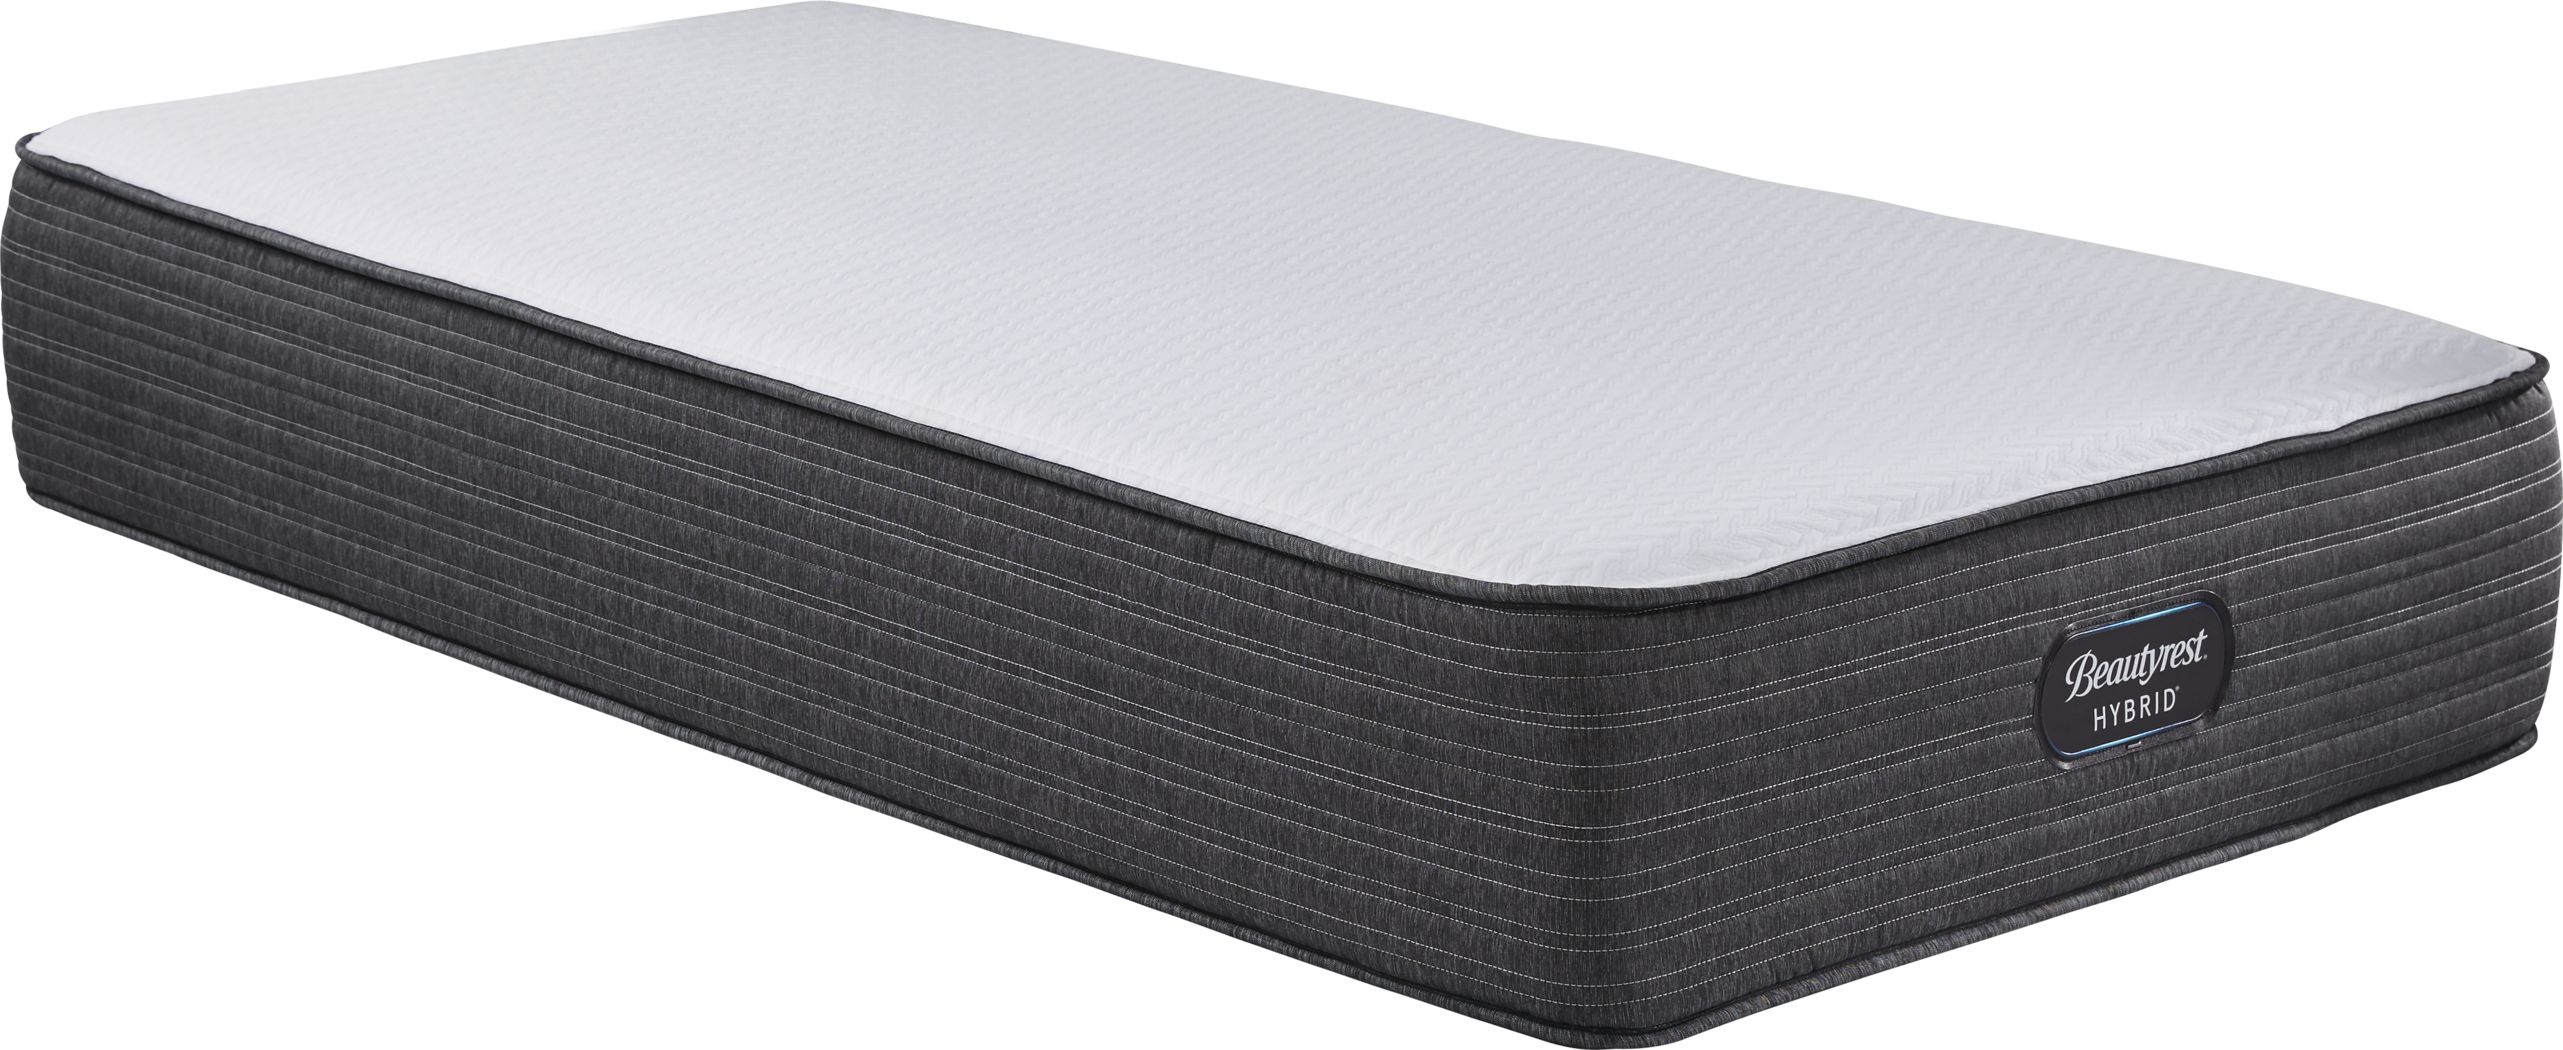 Beautyrest Hybrid Belmont Springs Twin Mattress - Rooms To Go